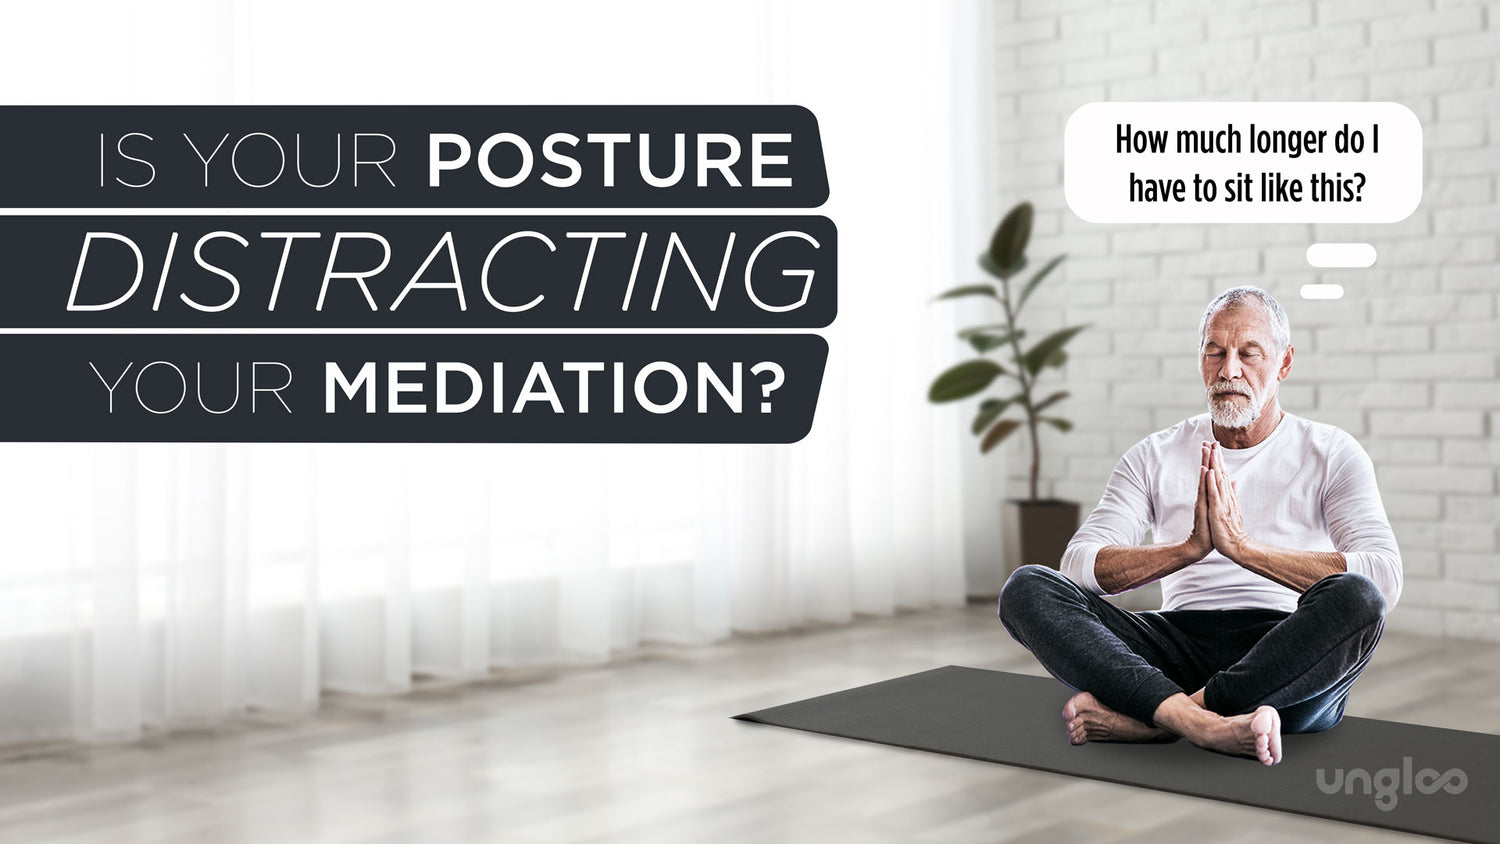 IS YOUR POSTURE DISTRACTING YOUR MEDIATION?